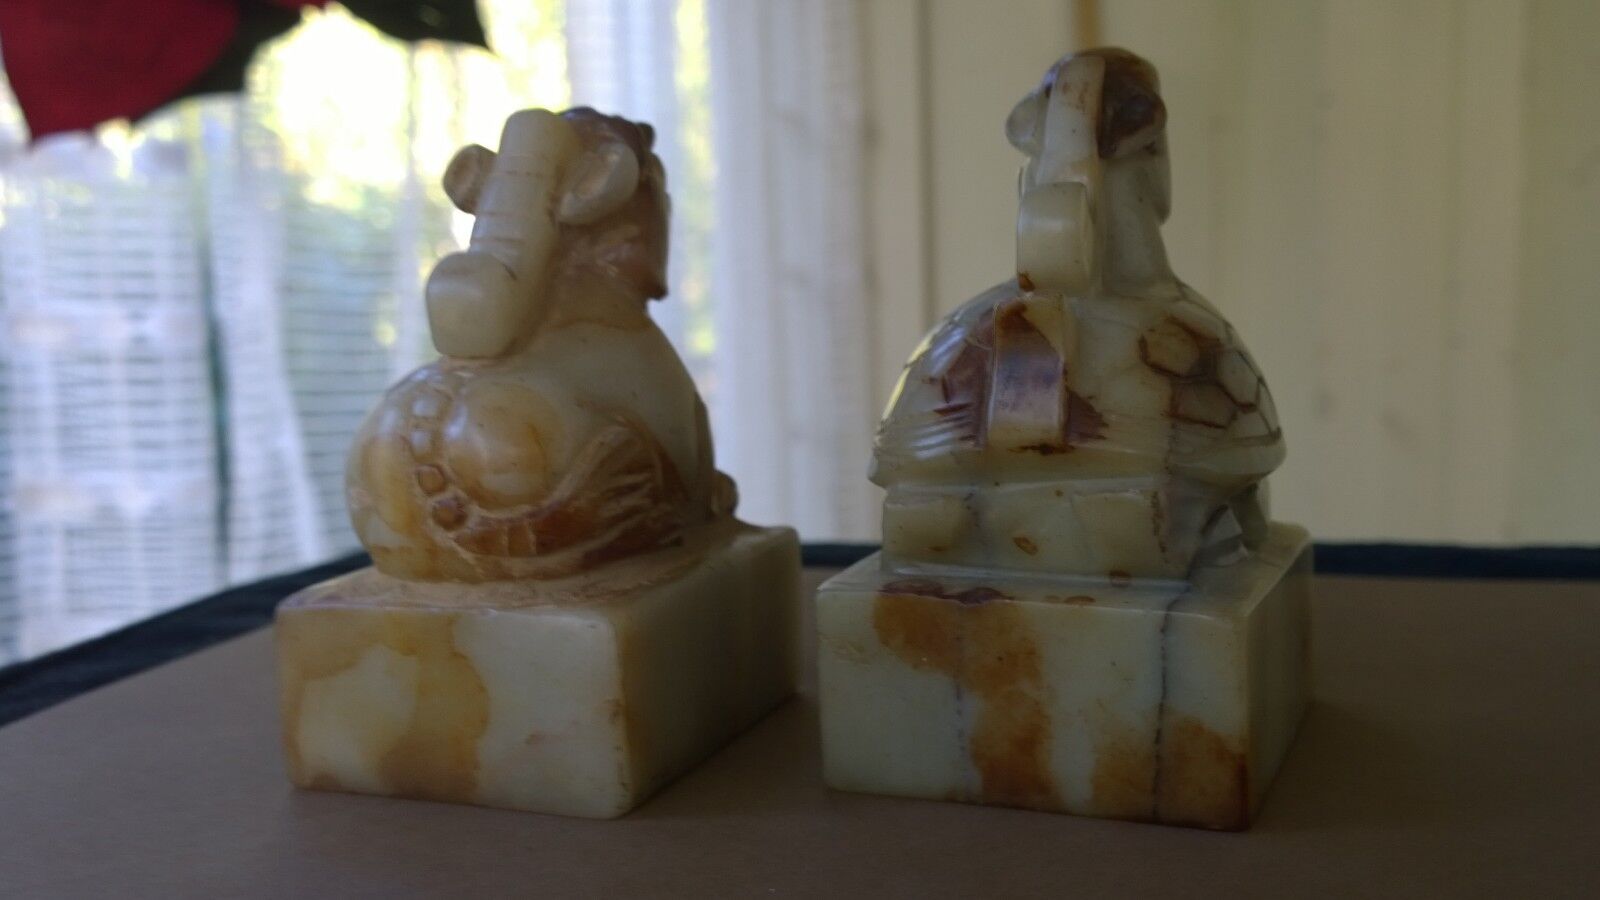 Group of Two Bixie Chop Seal Statues Carved of Hardstone Serpentine 488gr+399gr. Без бренда - фотография #10